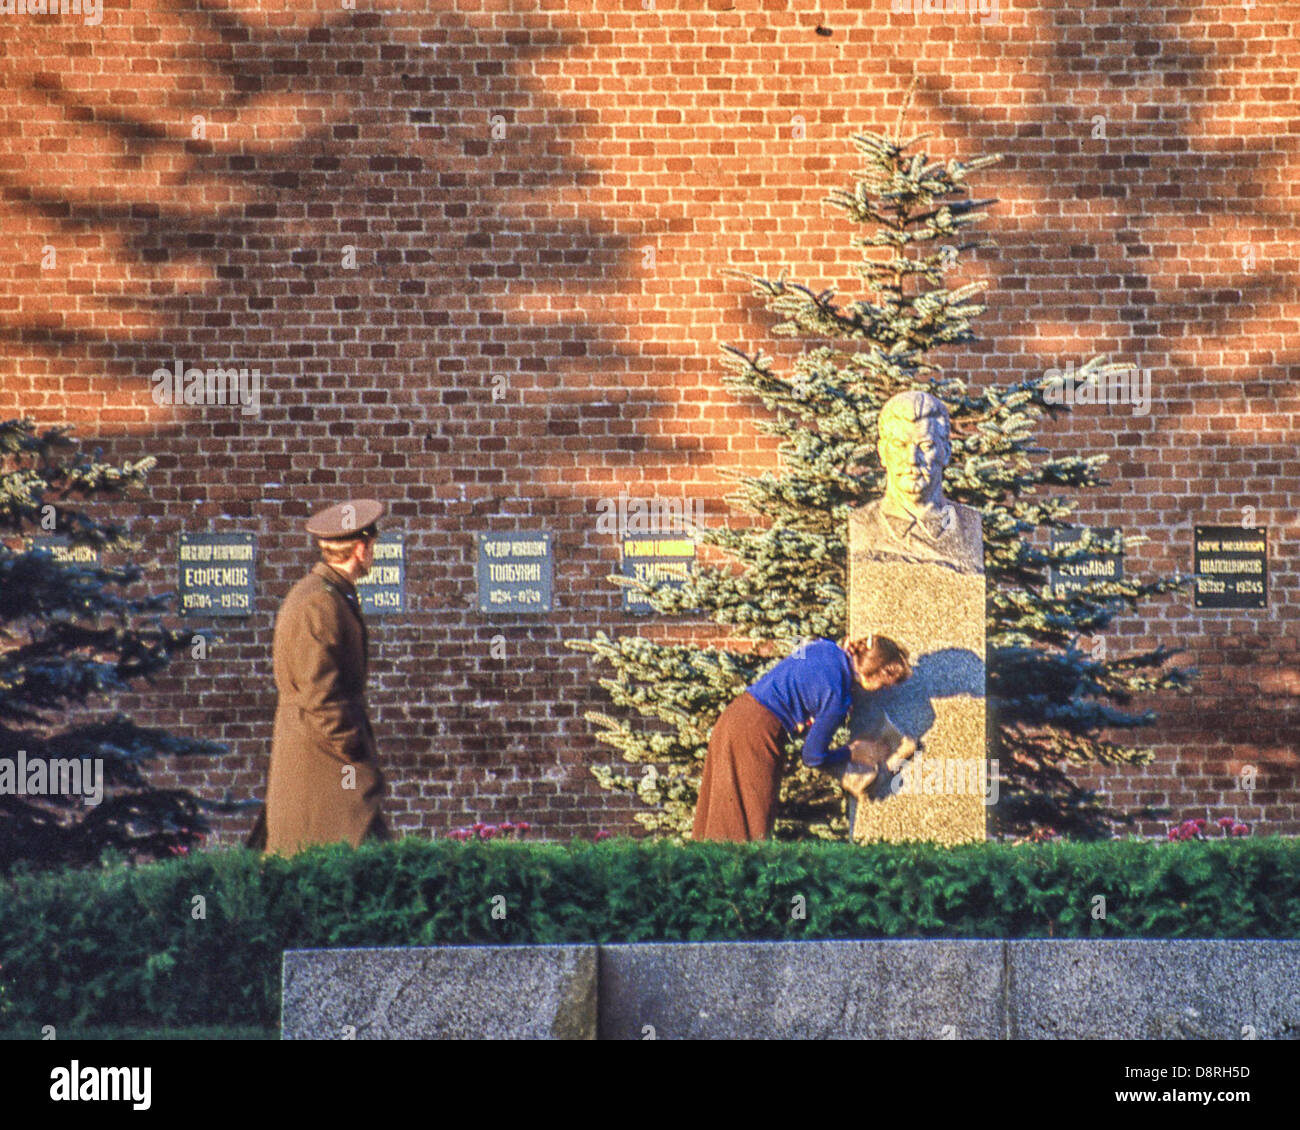 May 8, 1984 - Moscow, RU - A cleaning woman polishes the bust of Soviet Dictator Joseph Stalin (1878 - 1953), that marks his last resting place, a grave in the Kremlin Wall Necropolis behind Lenin's Mausoleum in Moscow His body was originally placed in Leninâ€™s Mausoleum, but in 1961 it was removed and buried here. (Credit Image: © Arnold Drapkin/ZUMAPRESS.com) Stock Photo